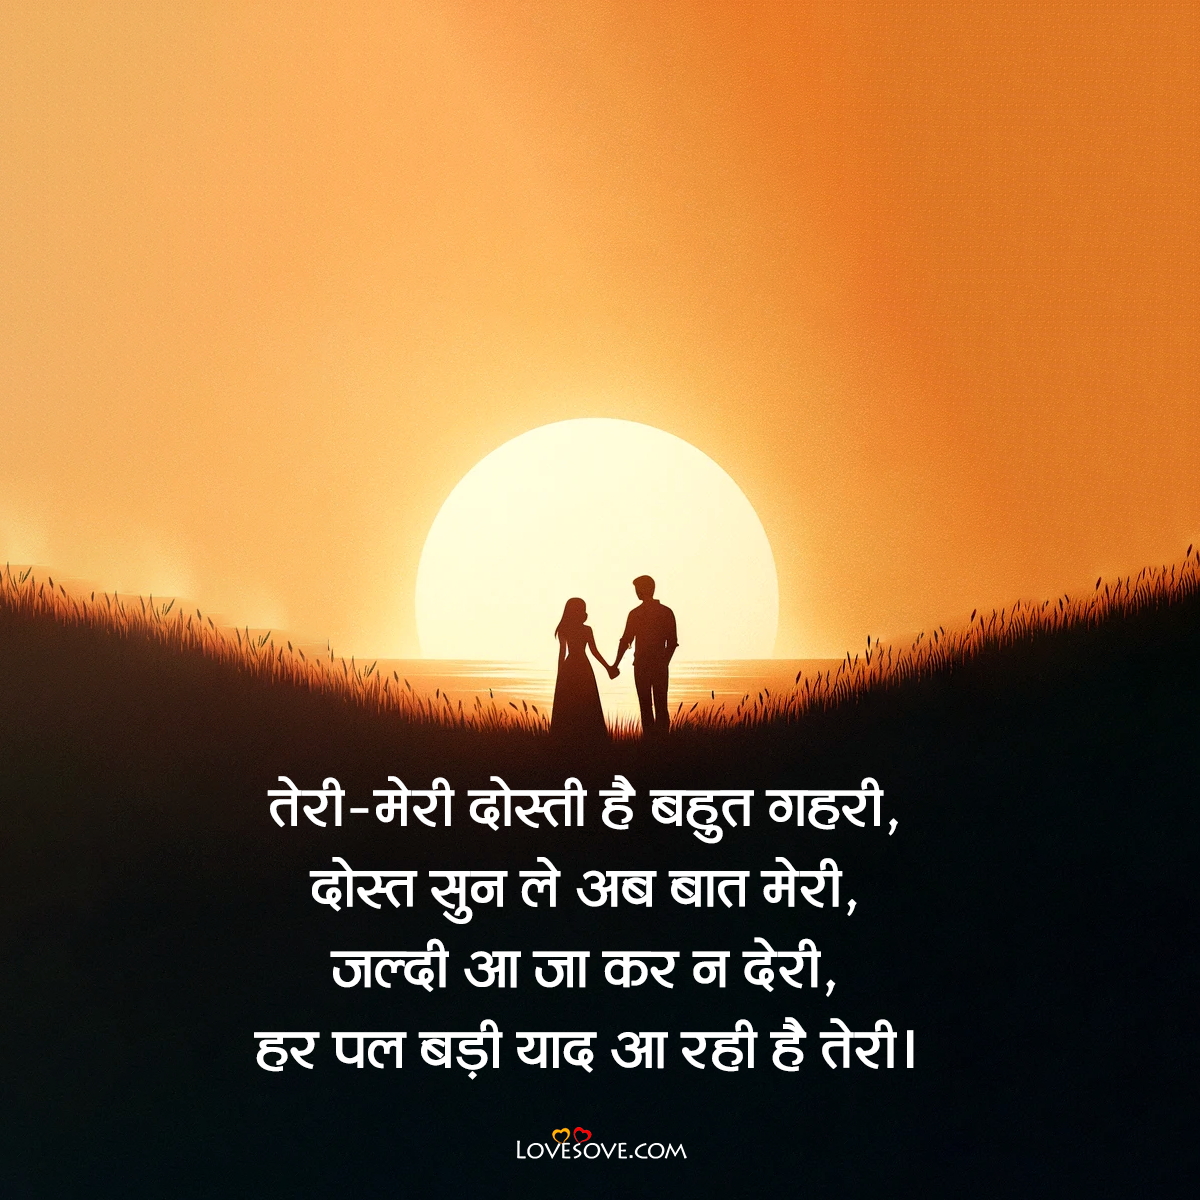 miss you quotes for siblings in hindi, मां के लिए आई मिस यू शायरी